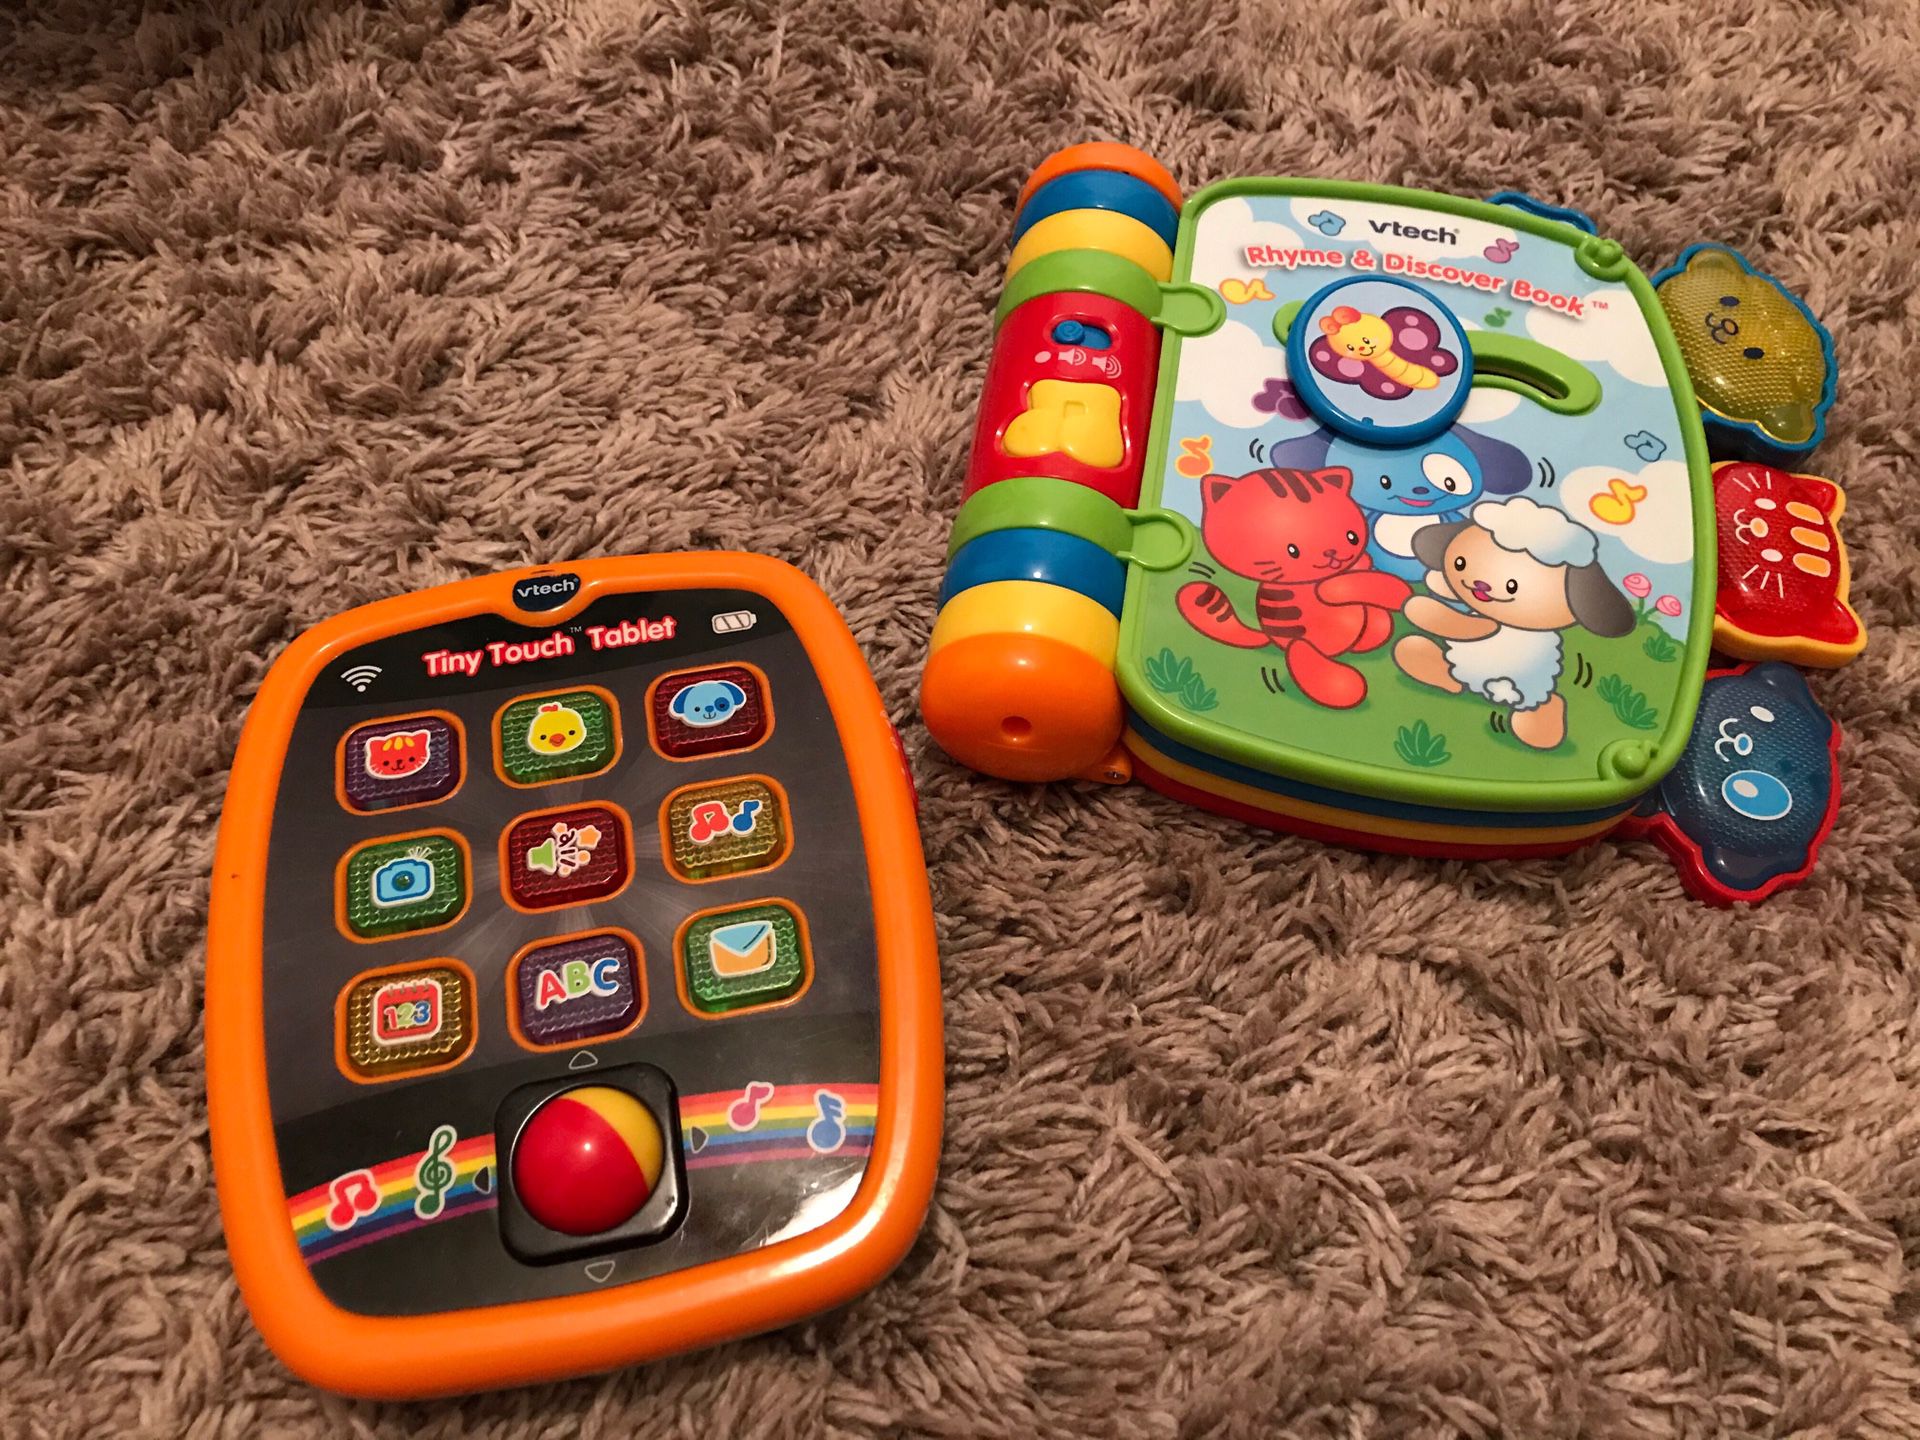 Vtech tablet and rhyme book